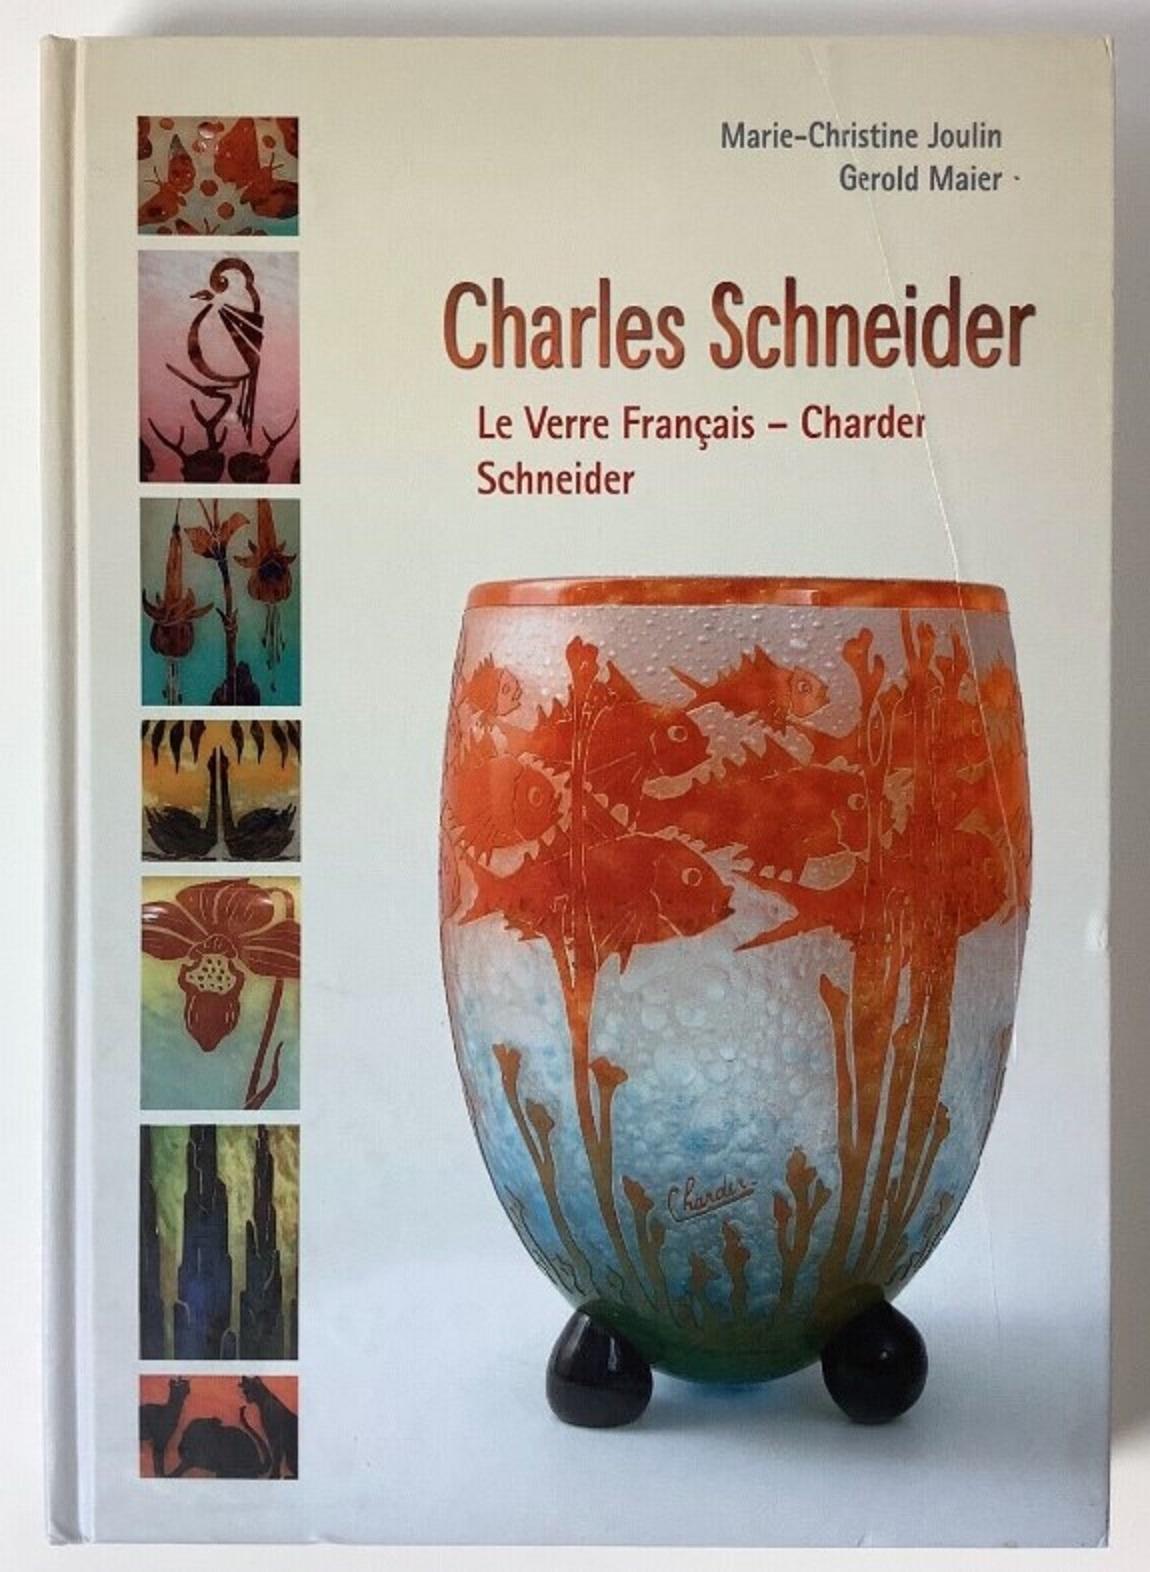  Vase Schneider With the symbol of candy or French flag, (Chickoree), 1920 For Sale 4